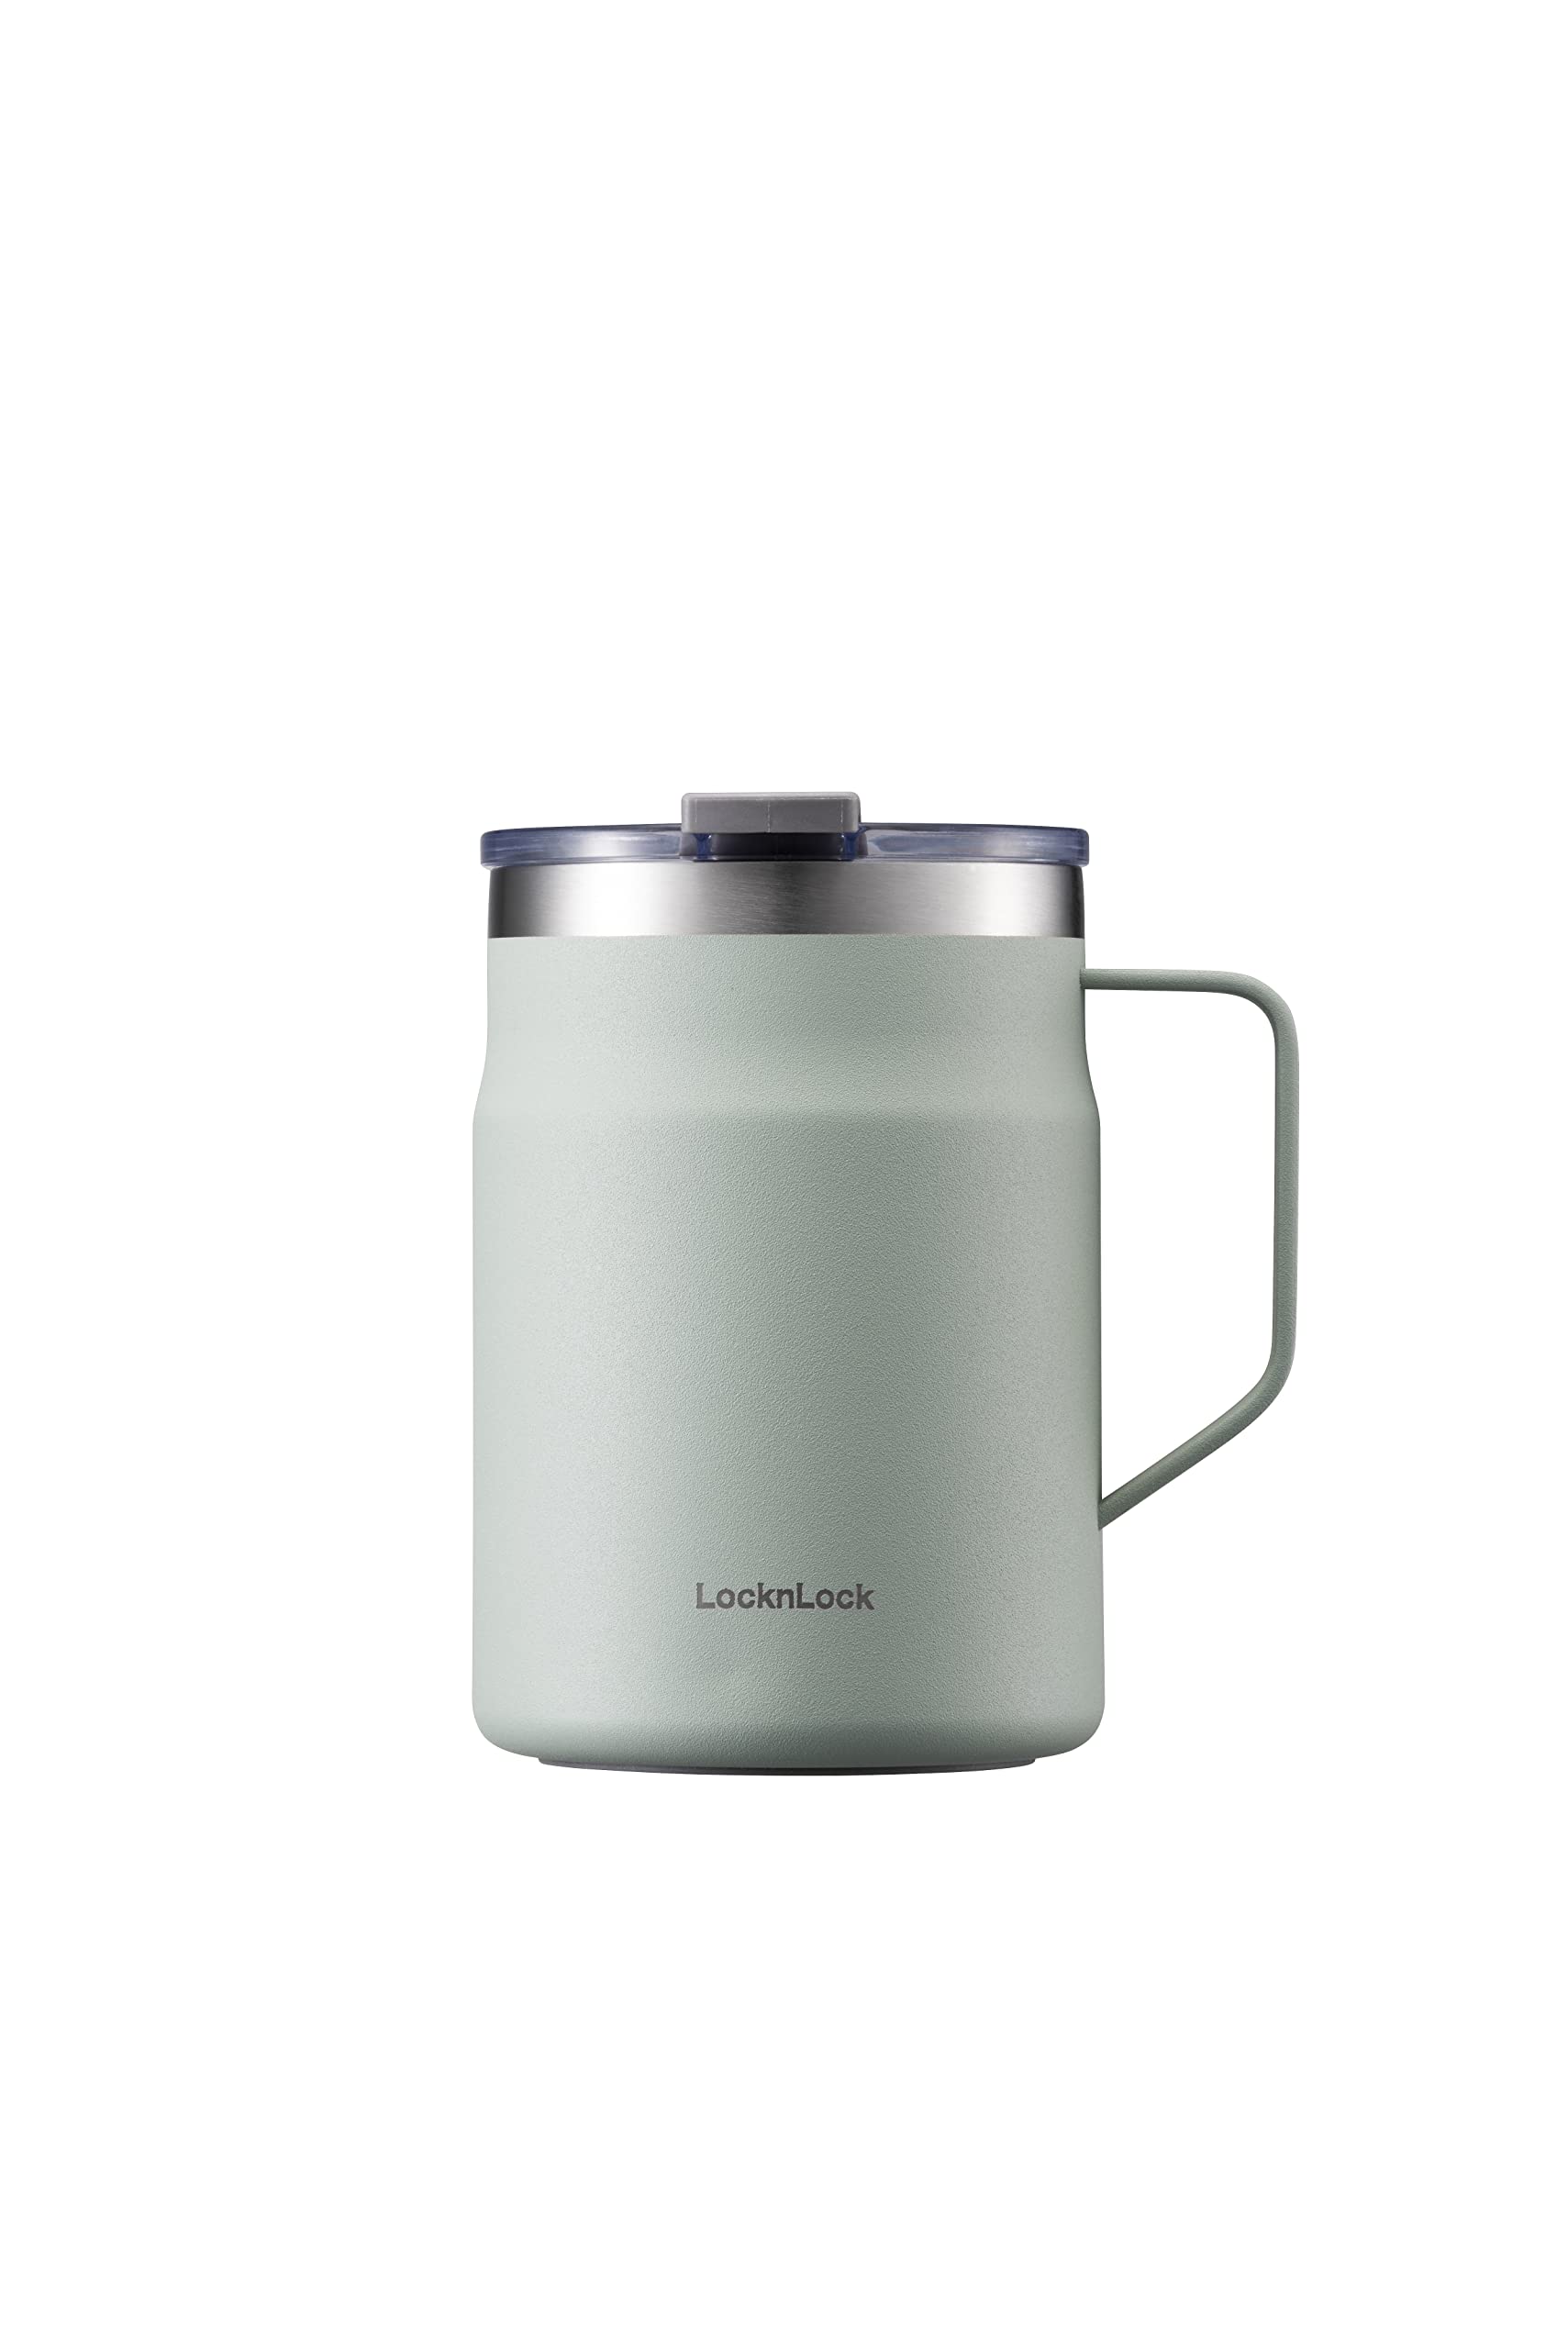 LocknLock Stainless Steel Double Wall Insulated with Handle, Lid, 16 oz, Mint Metro Mug